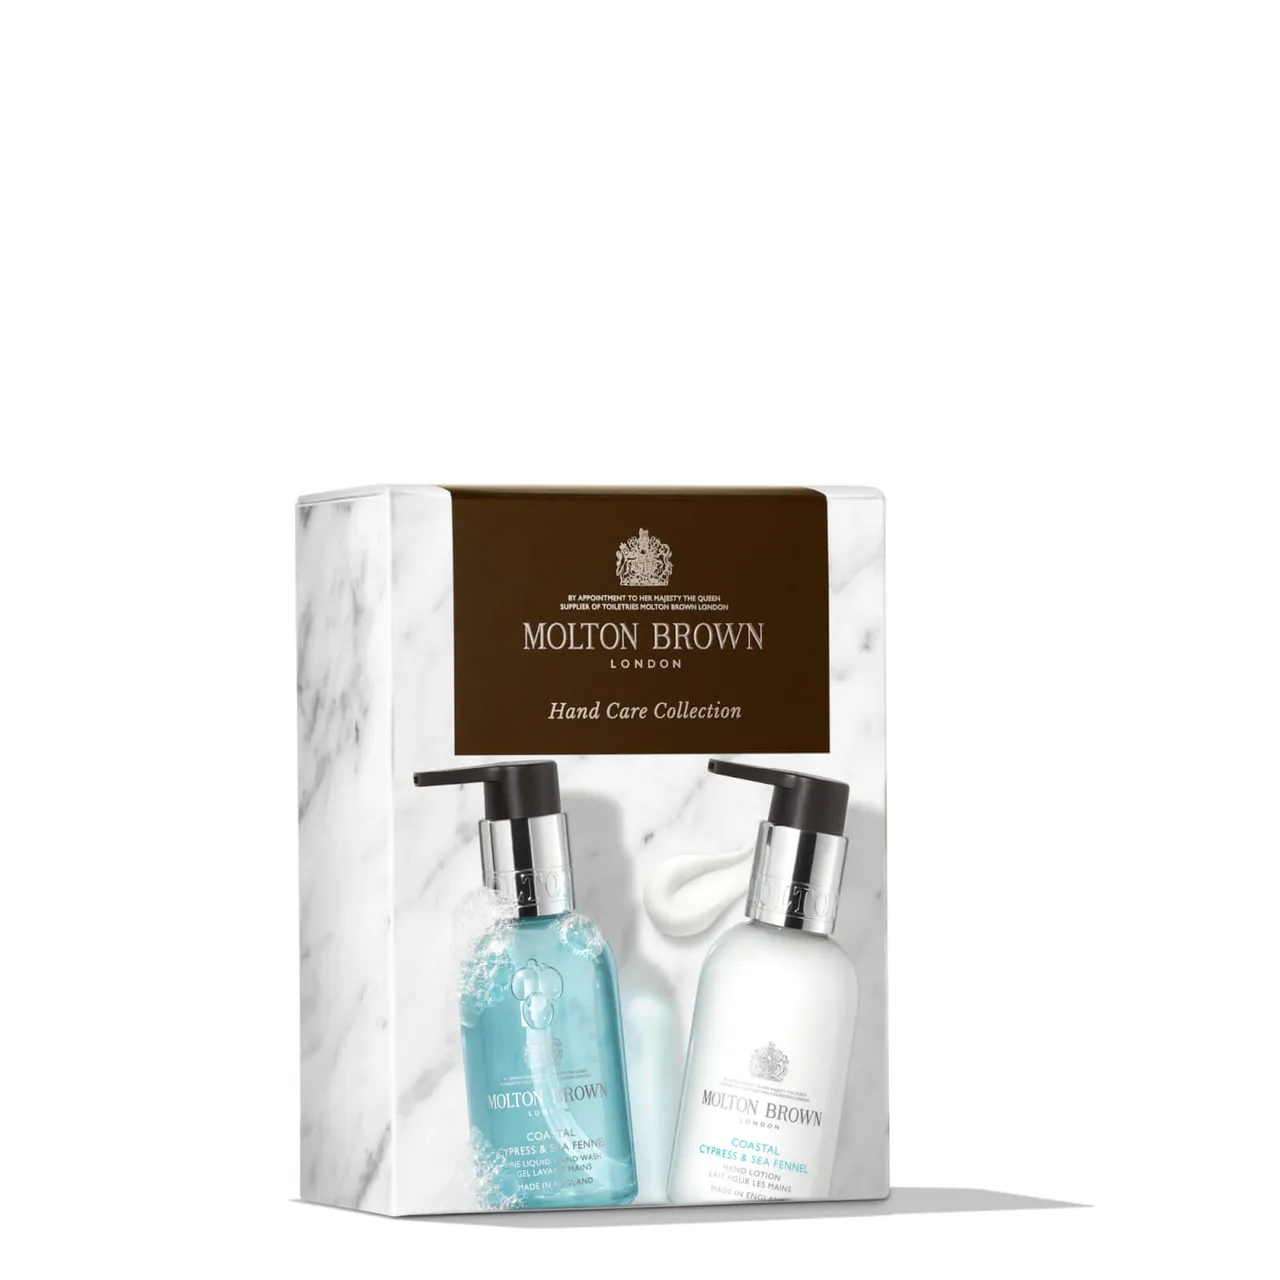 Molton Brown Coastal Cypress and Sea Fennel Hand Care Collection (Worth £20.00)